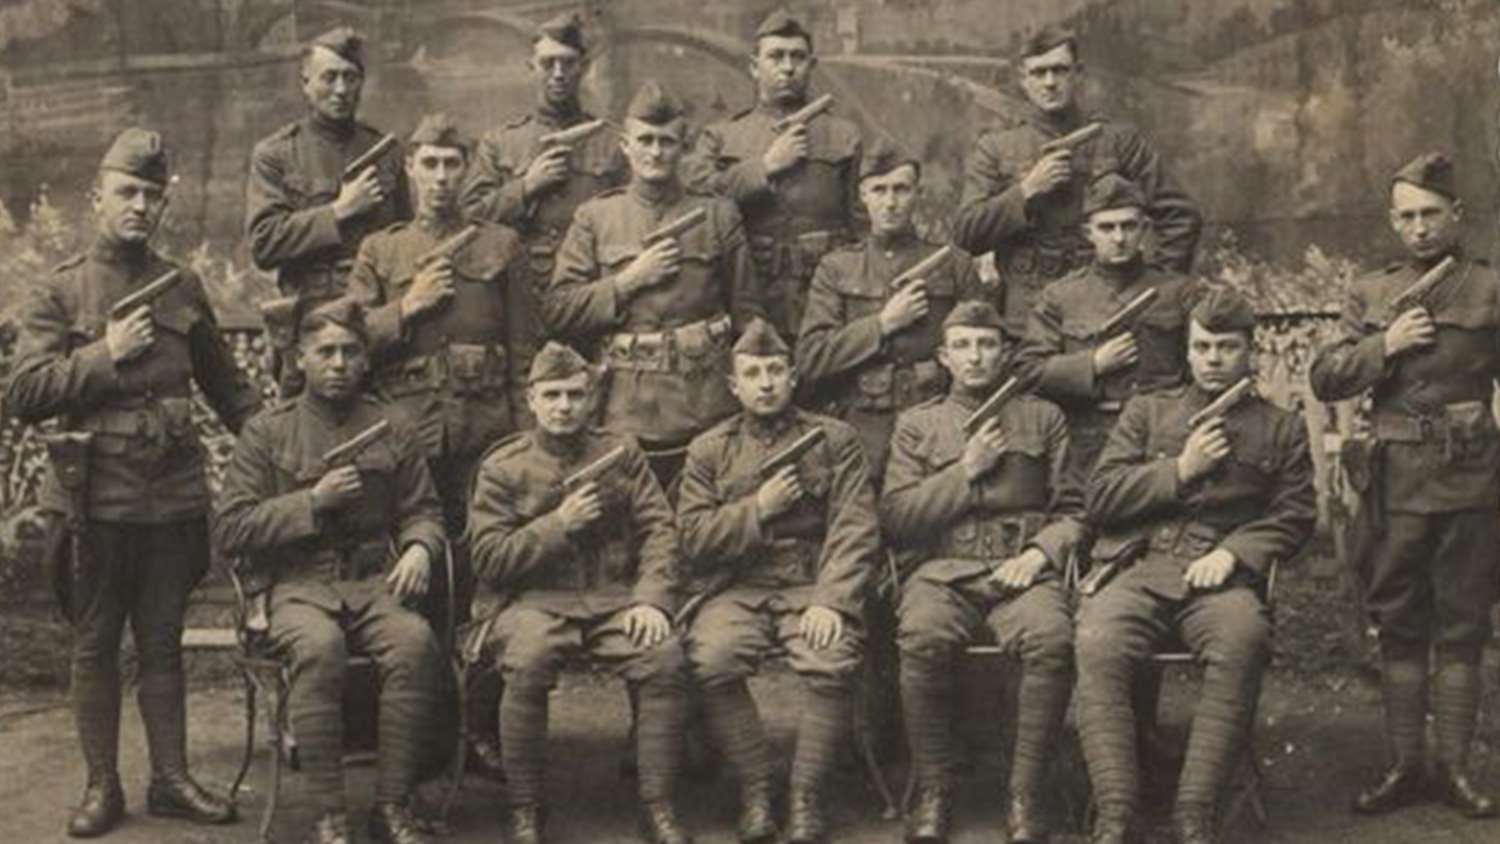 A battalion poses with their Colt M1911 pistols